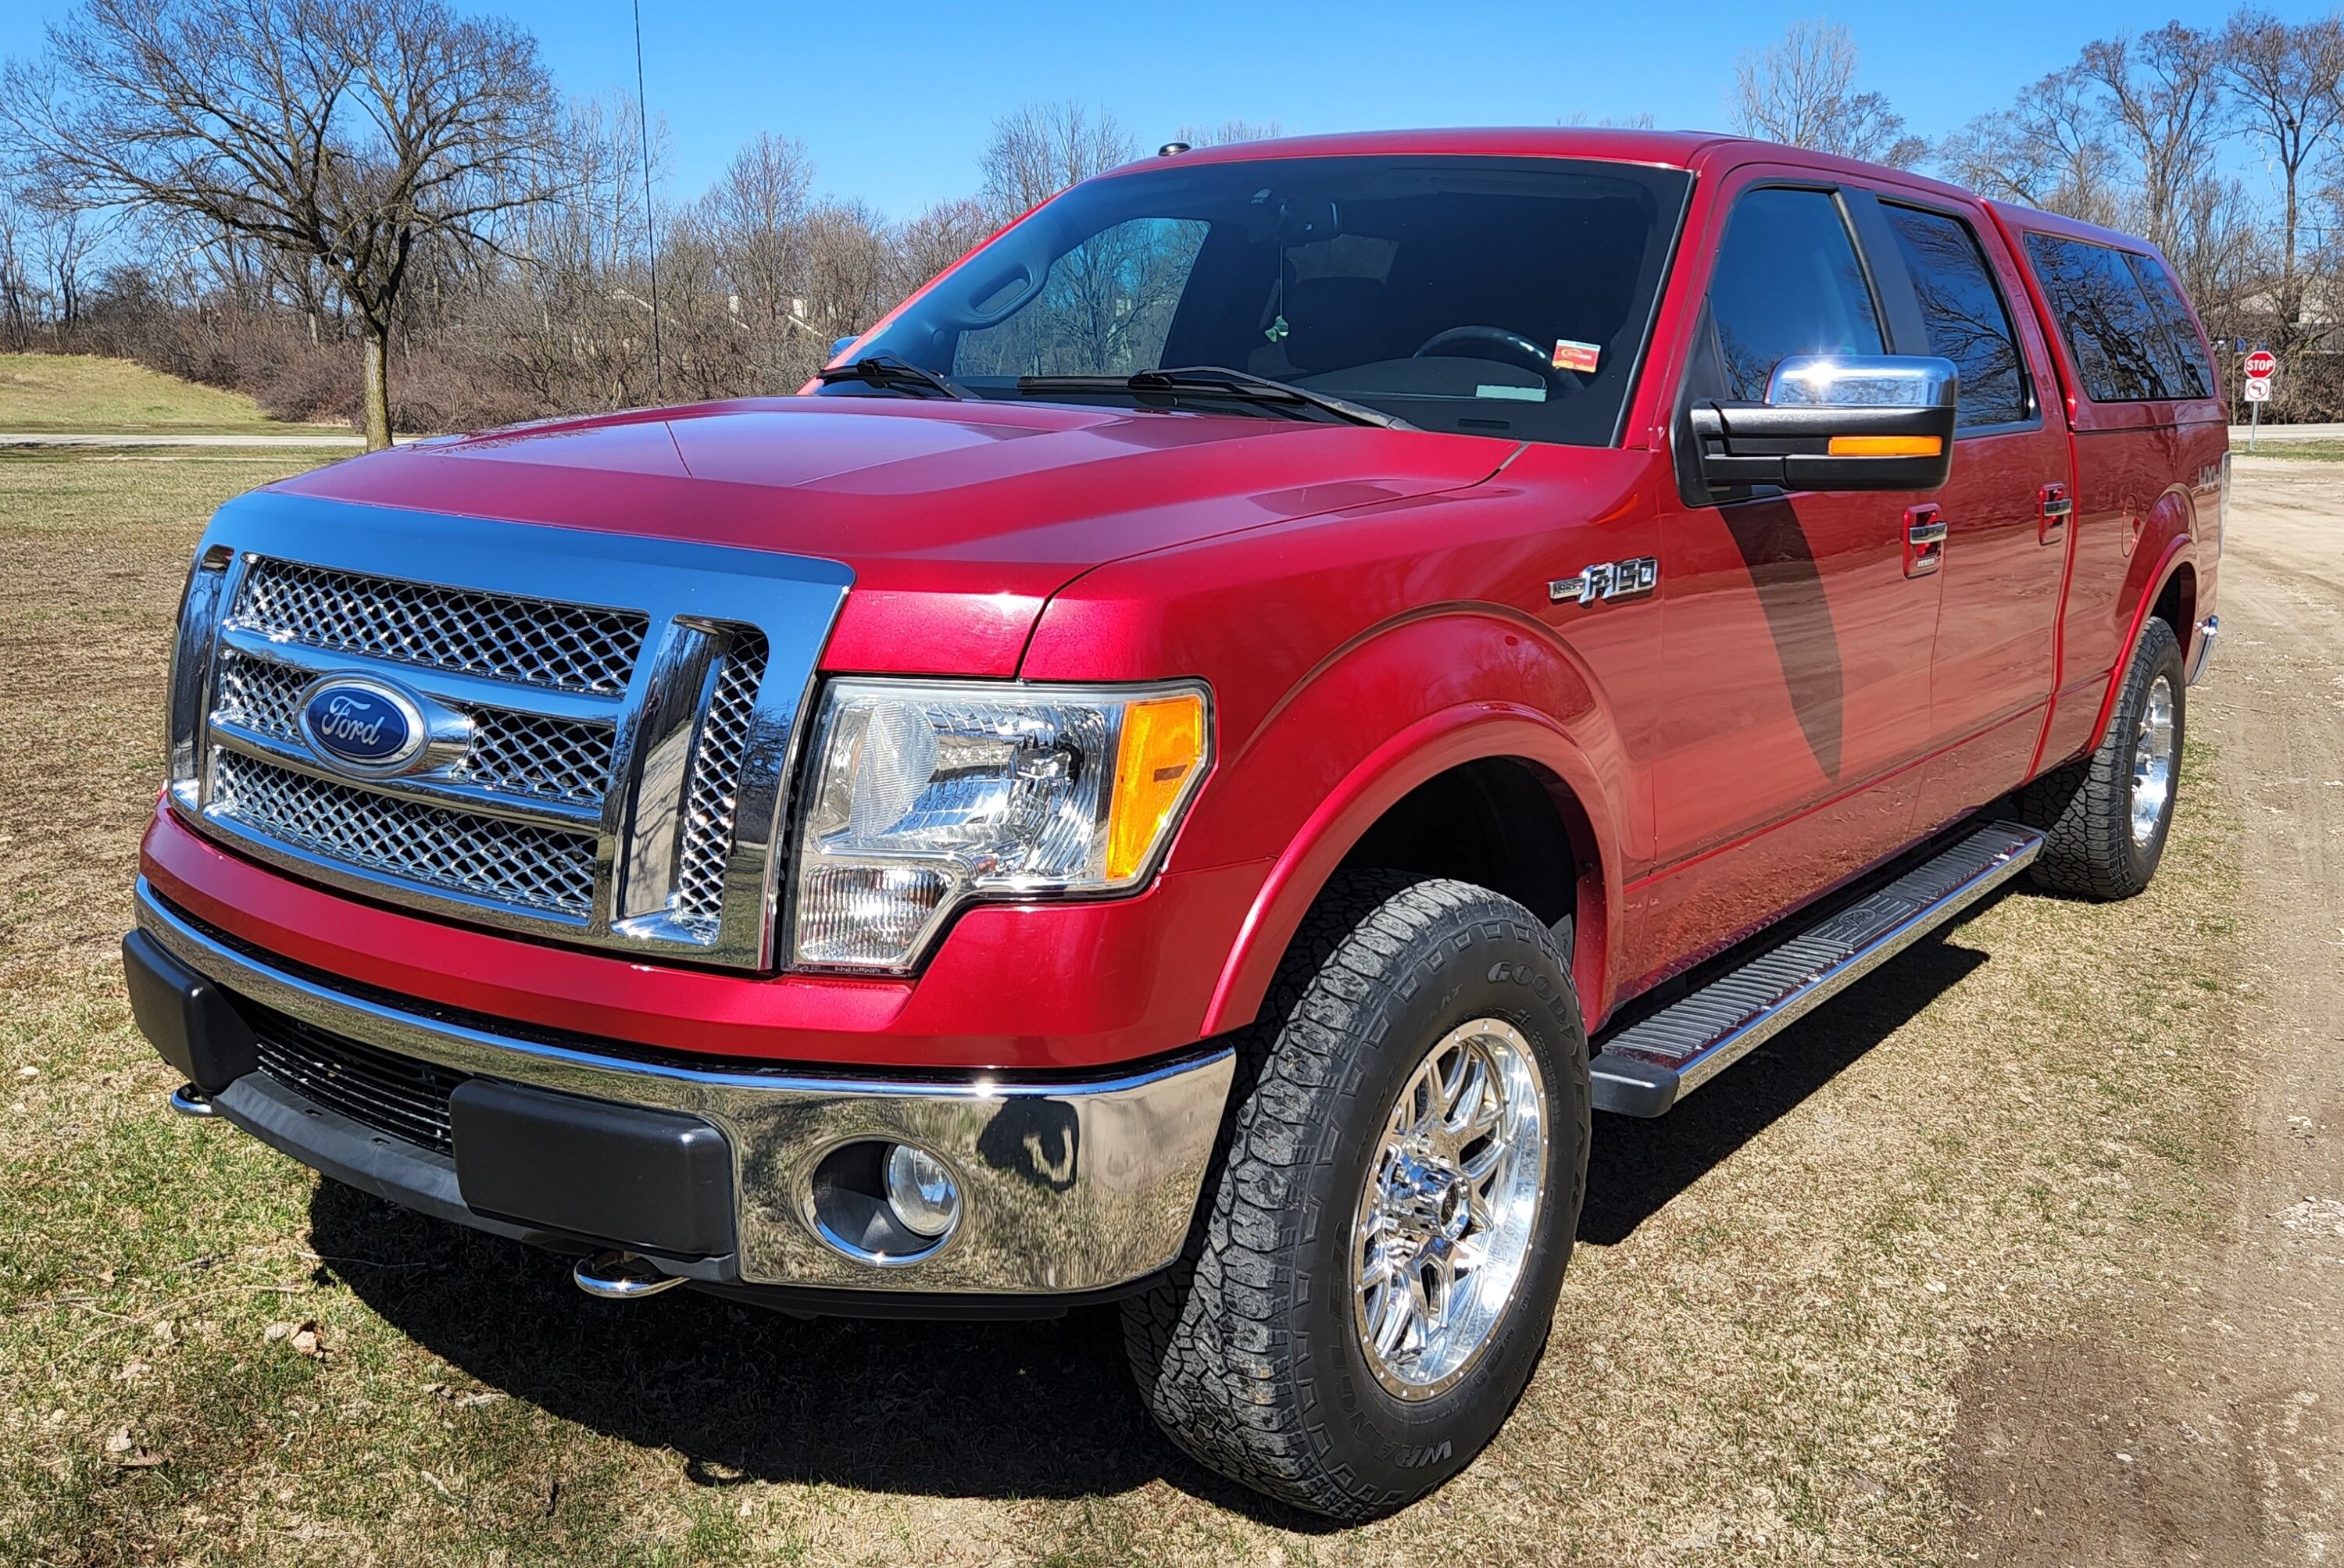 Ford F-150 Post a Pic of Your F150 and We’ll Rate It 2